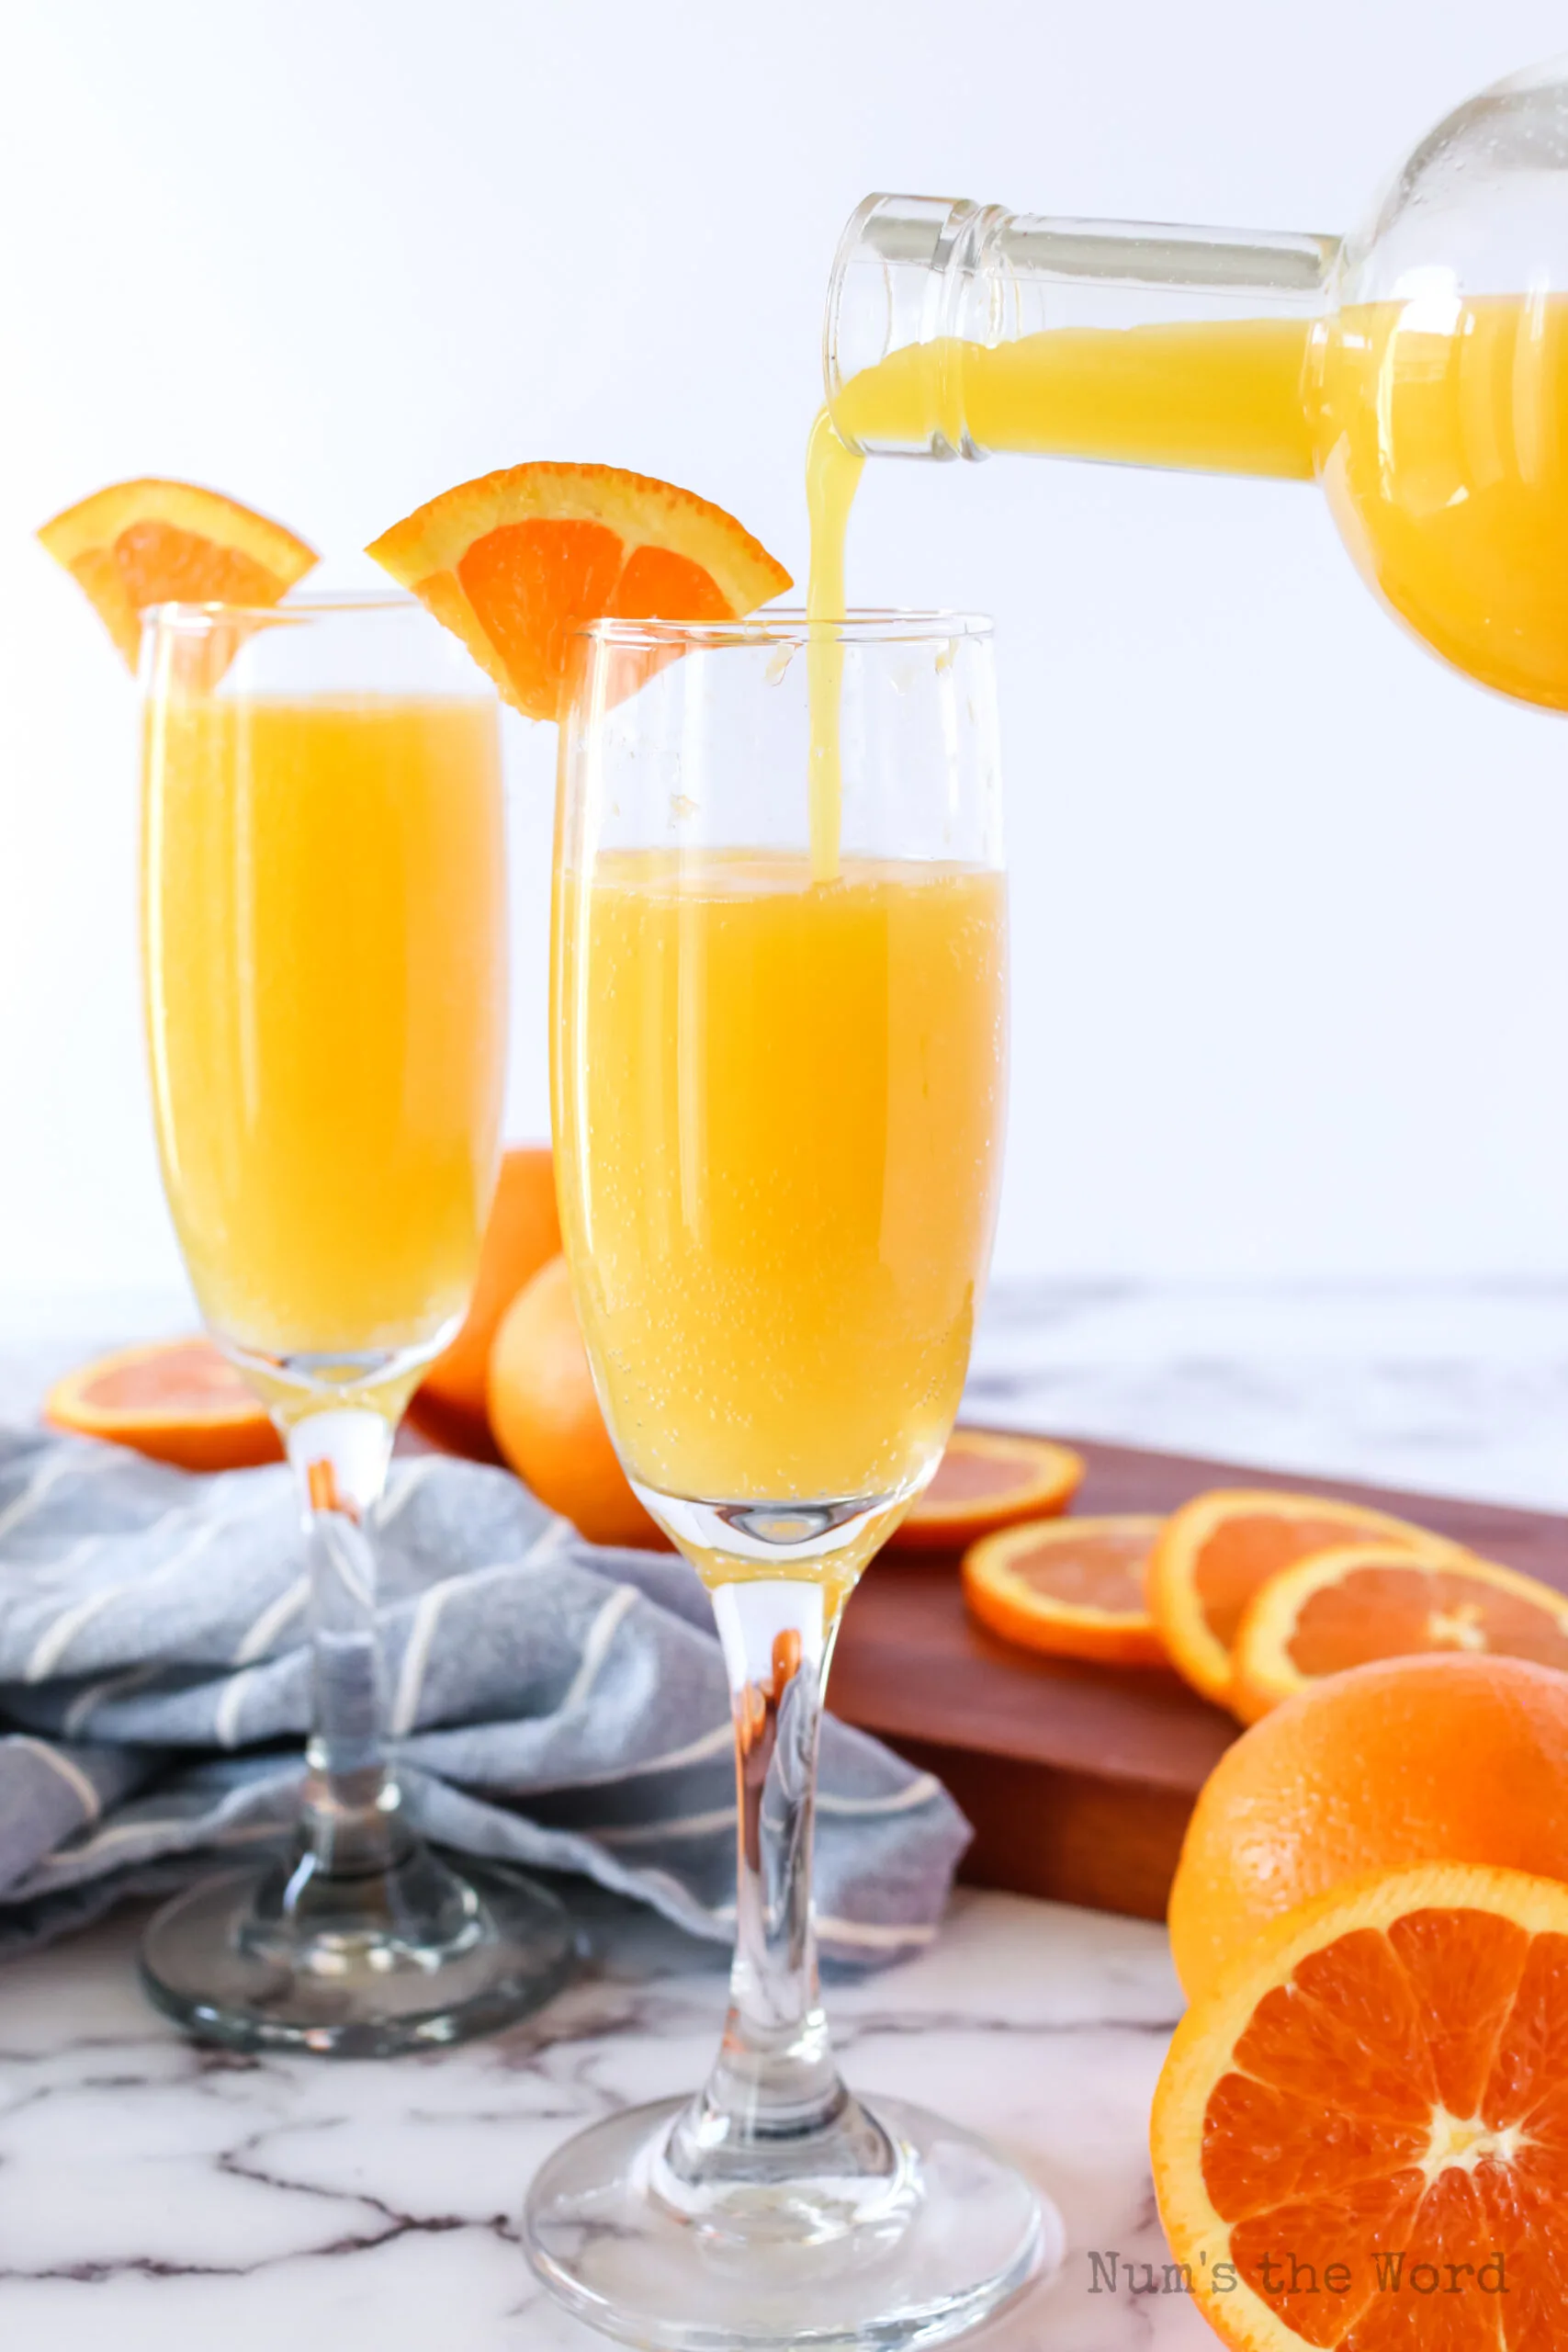 orange juice being poured into a glass full of ginger ale.